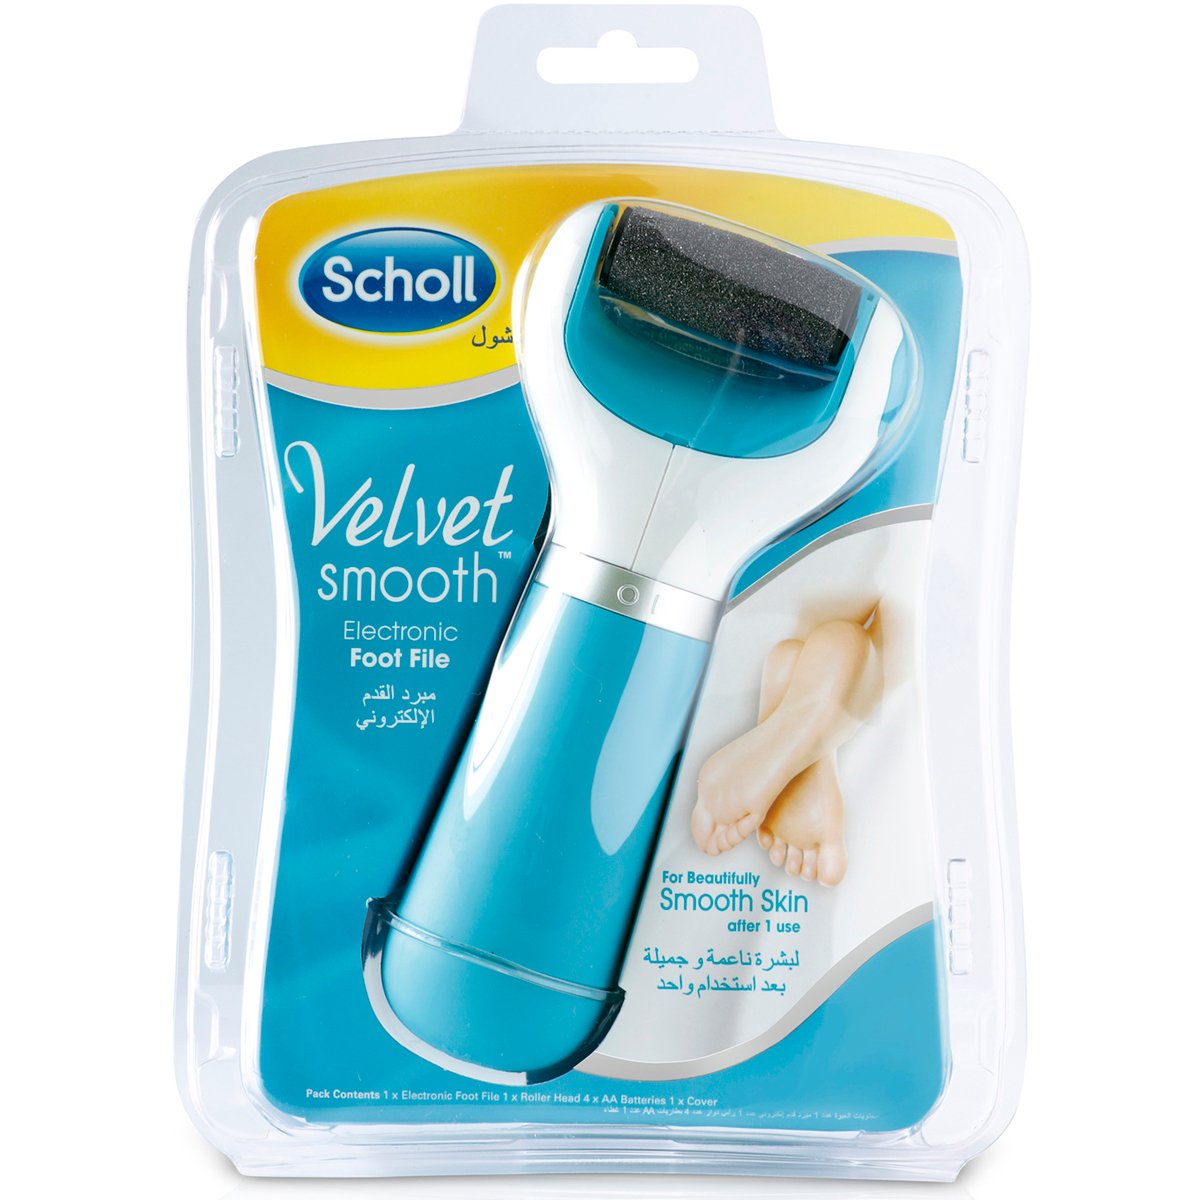 Scholl Foot Care Velvet Smooth Electronic Pedicure Hard Skin Remover Gadget & Refill